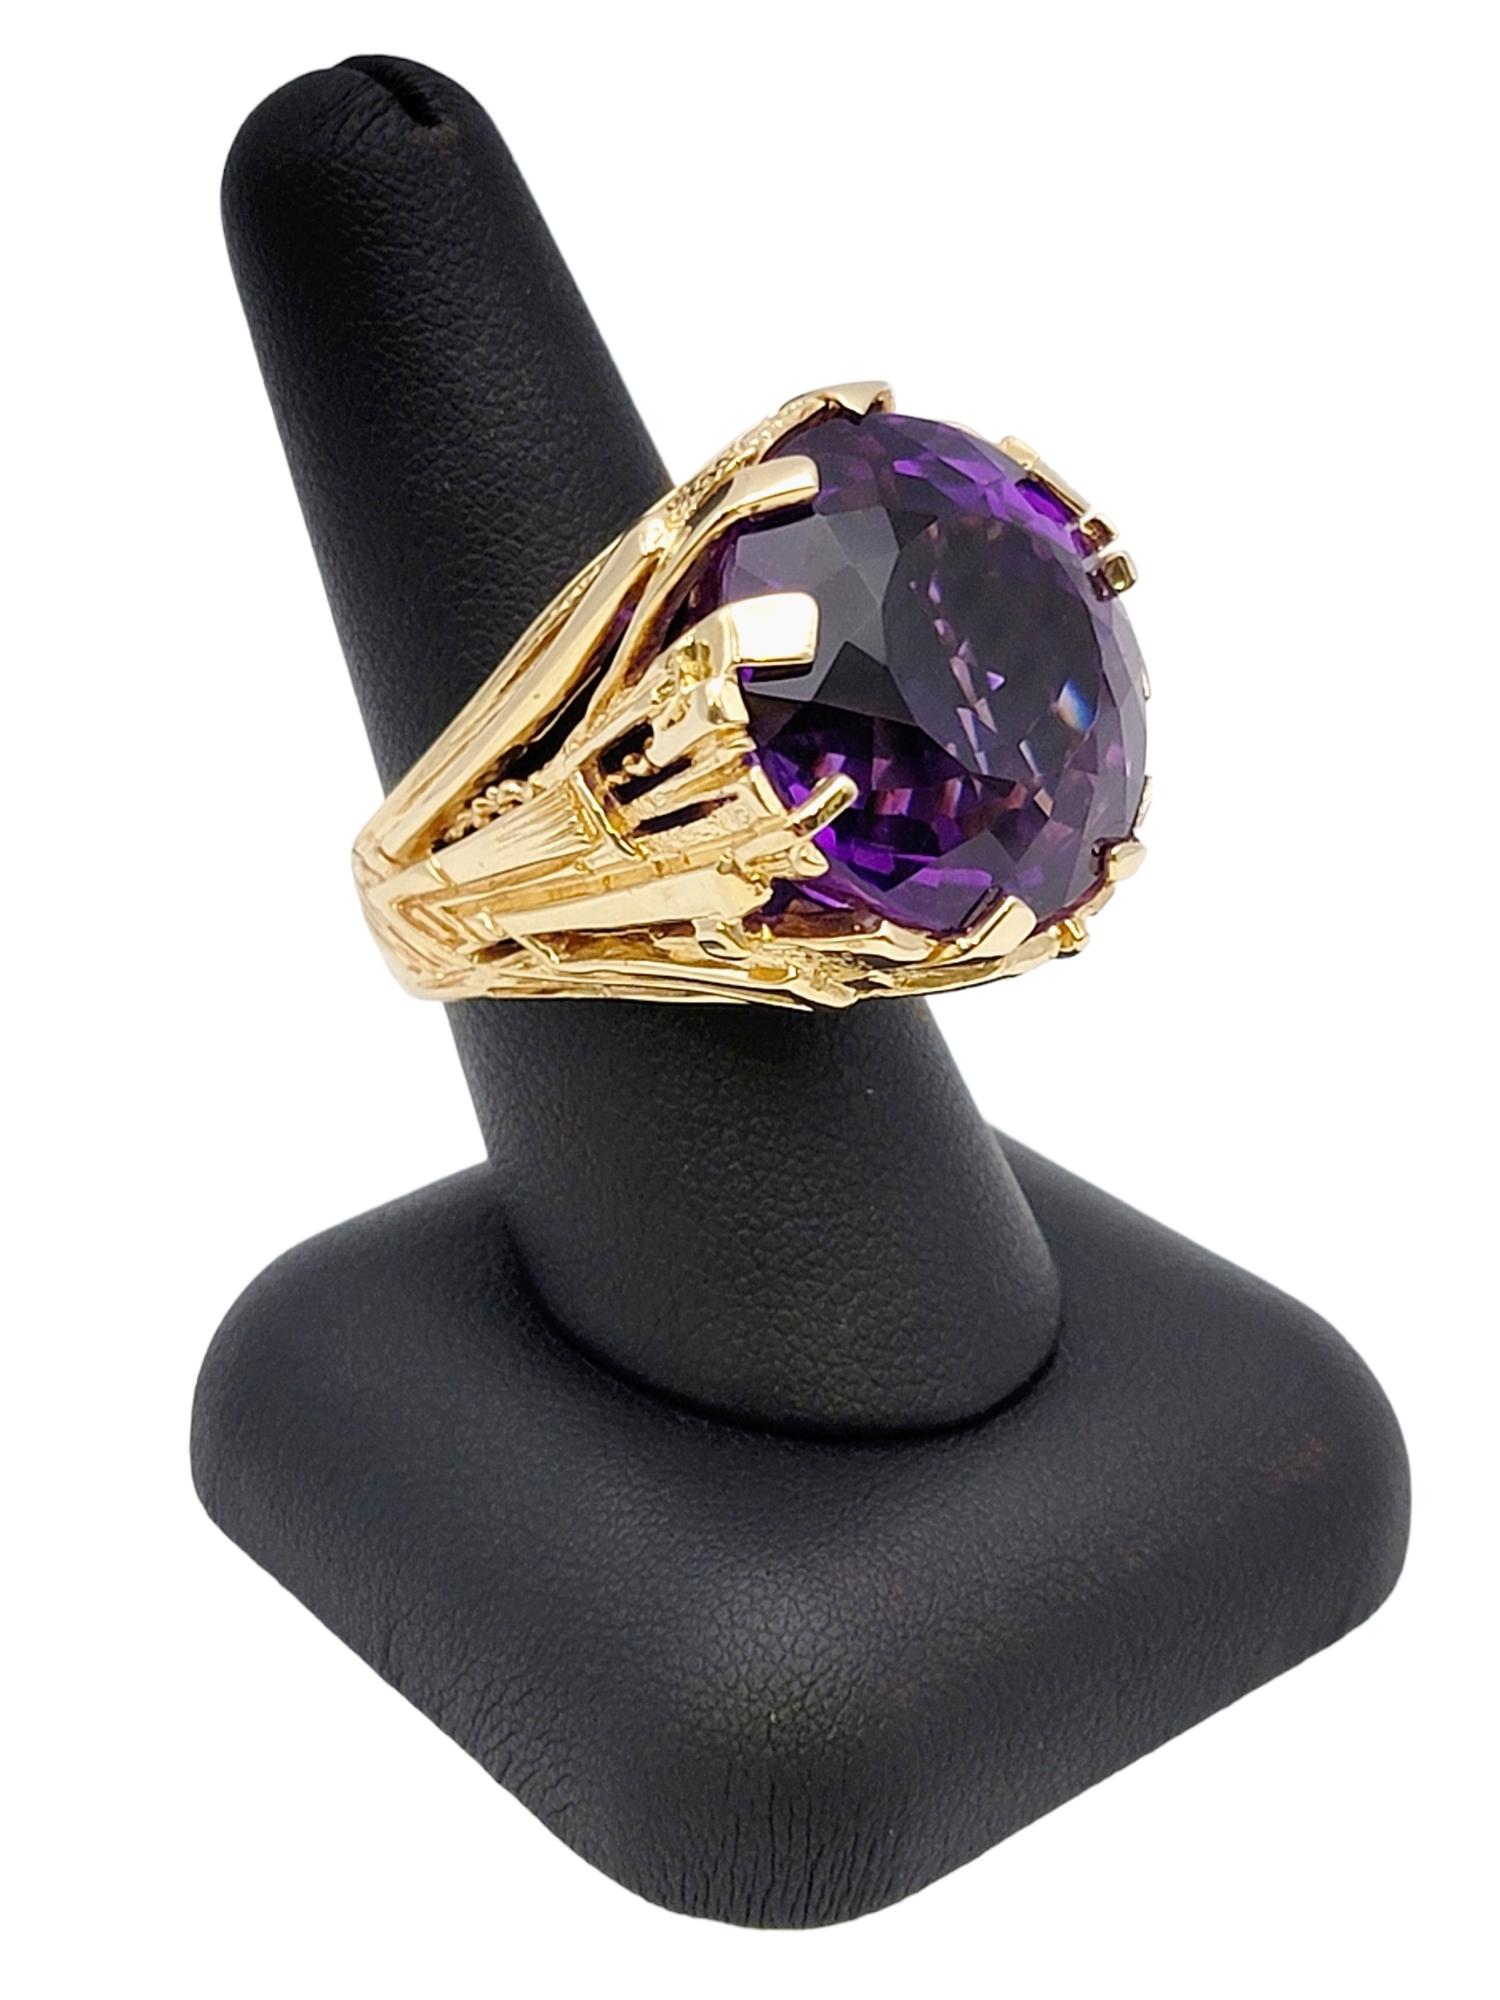 Massive 40.01 Carat Round Cut Amethyst Solitaire Cocktail Ring in Yellow Gold  For Sale 7